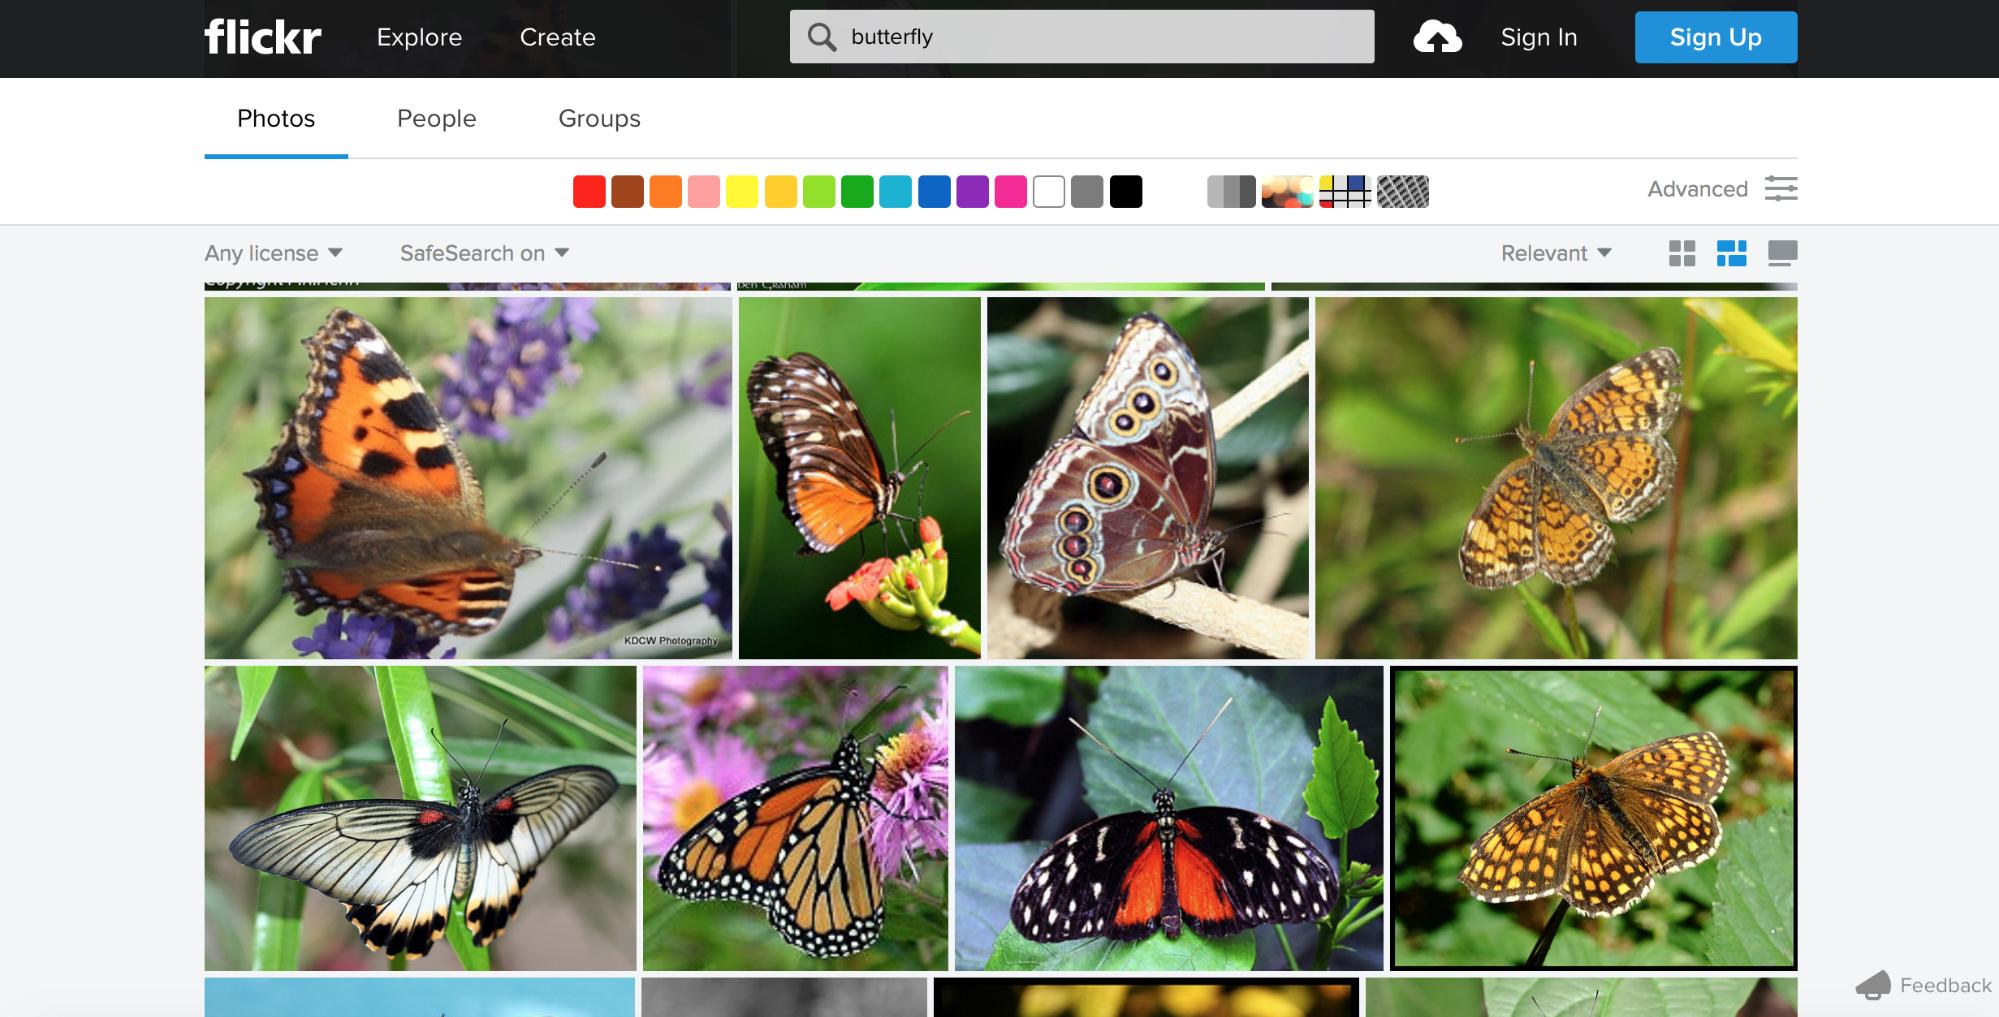 Flickr has so much eclectic content that a multi-page format would be too difficult to navigate.